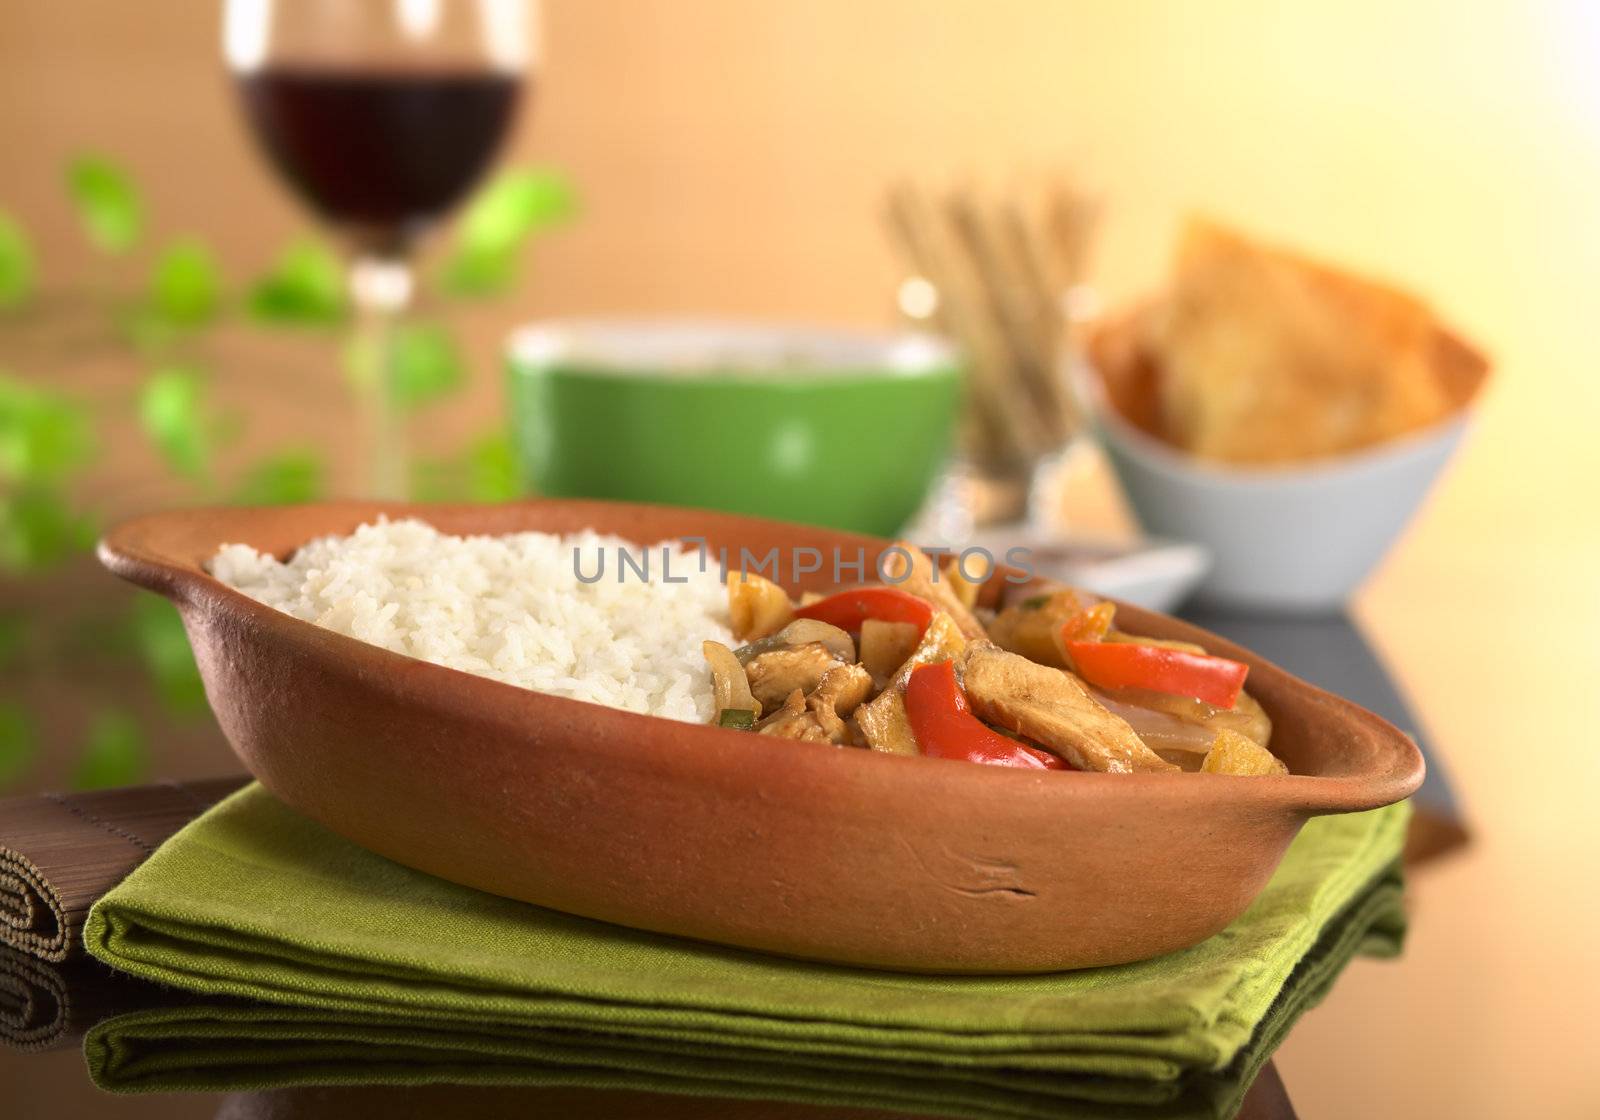 Peruvian food called Lomo Saltado made of meat, bell pepper and onions served with cooked rice (Selective Focus, Focus on the front of the meal)